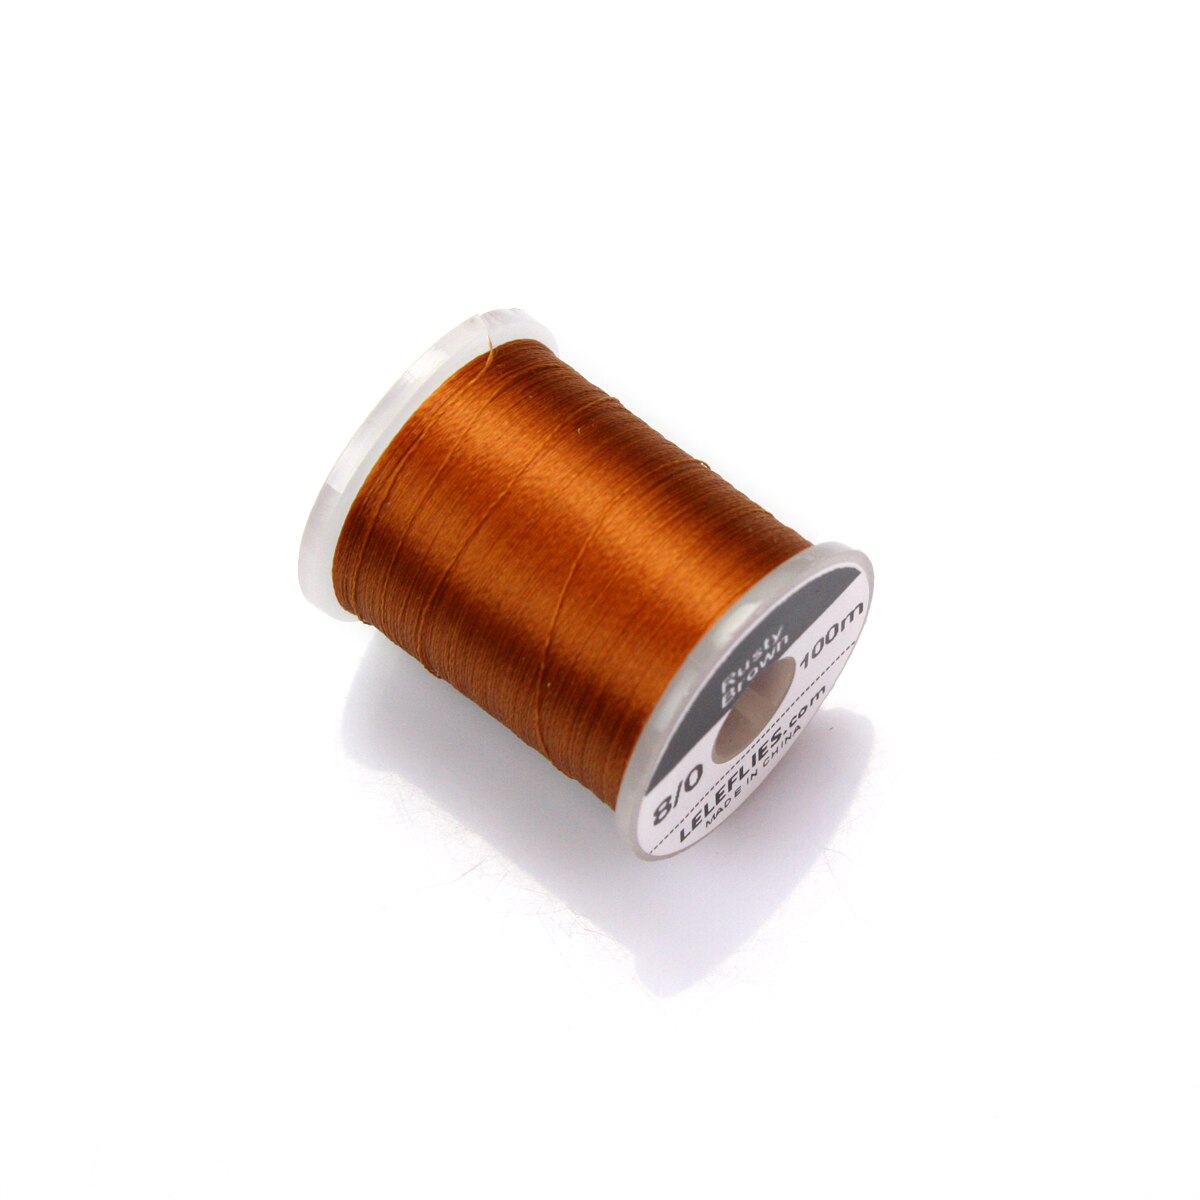 72 Spools of Fly Tying Thread, Tinsel, Floss, Wool, Copper and Lead Wires 